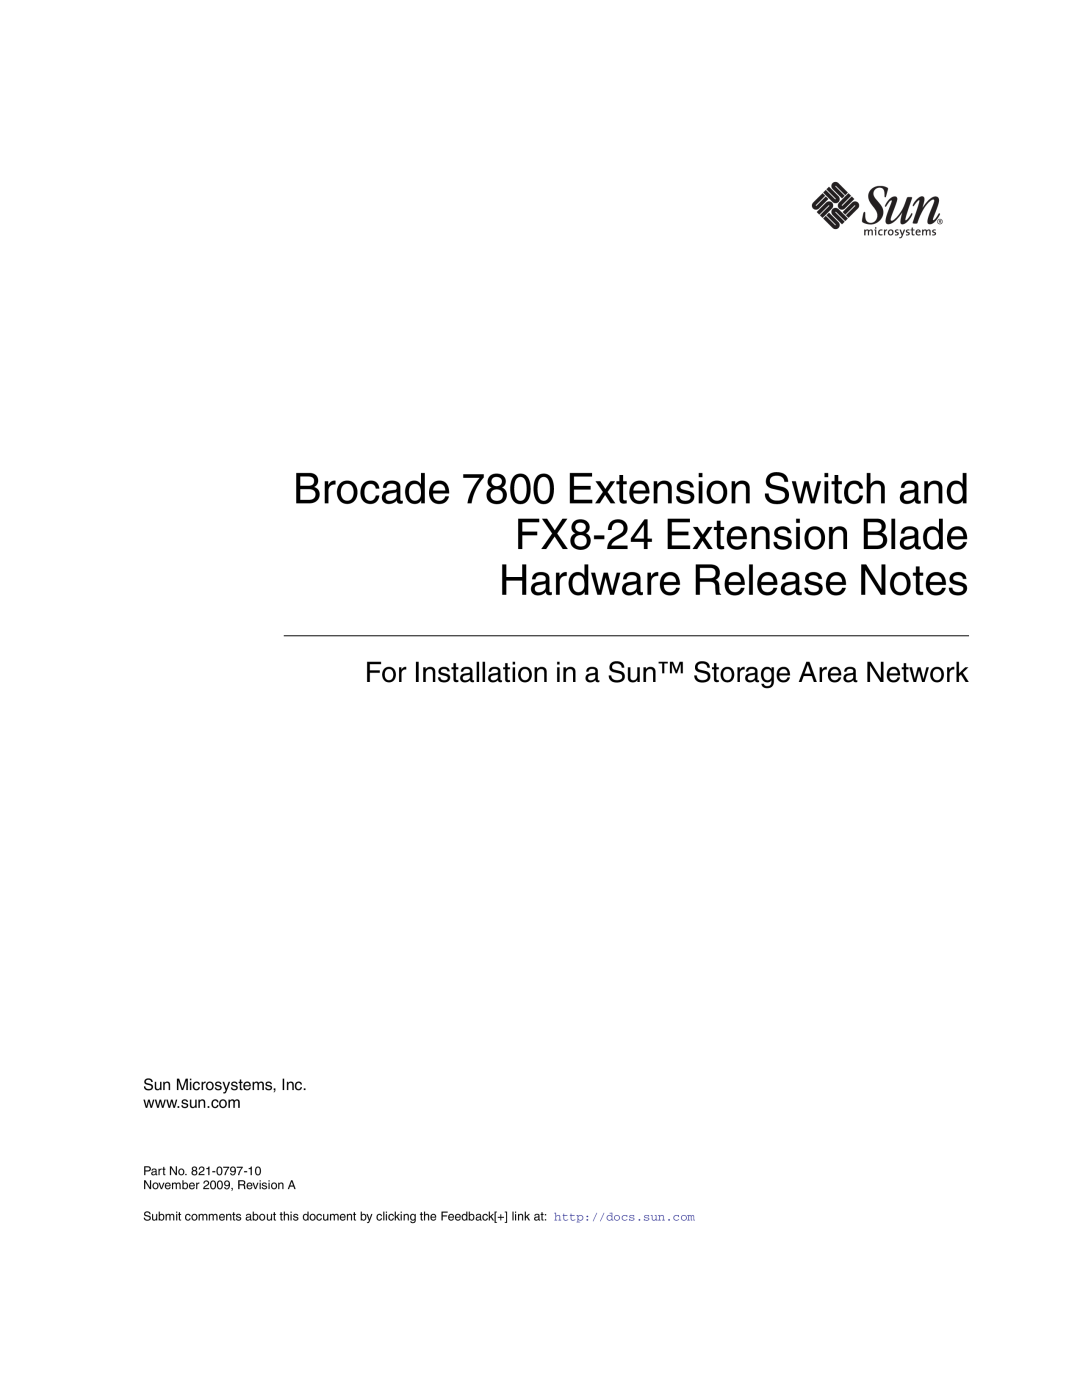 Sun Microsystems manual Brocade 7800 Extension Switch and FX8-24 Extension Blade, Hardware Release Notes 